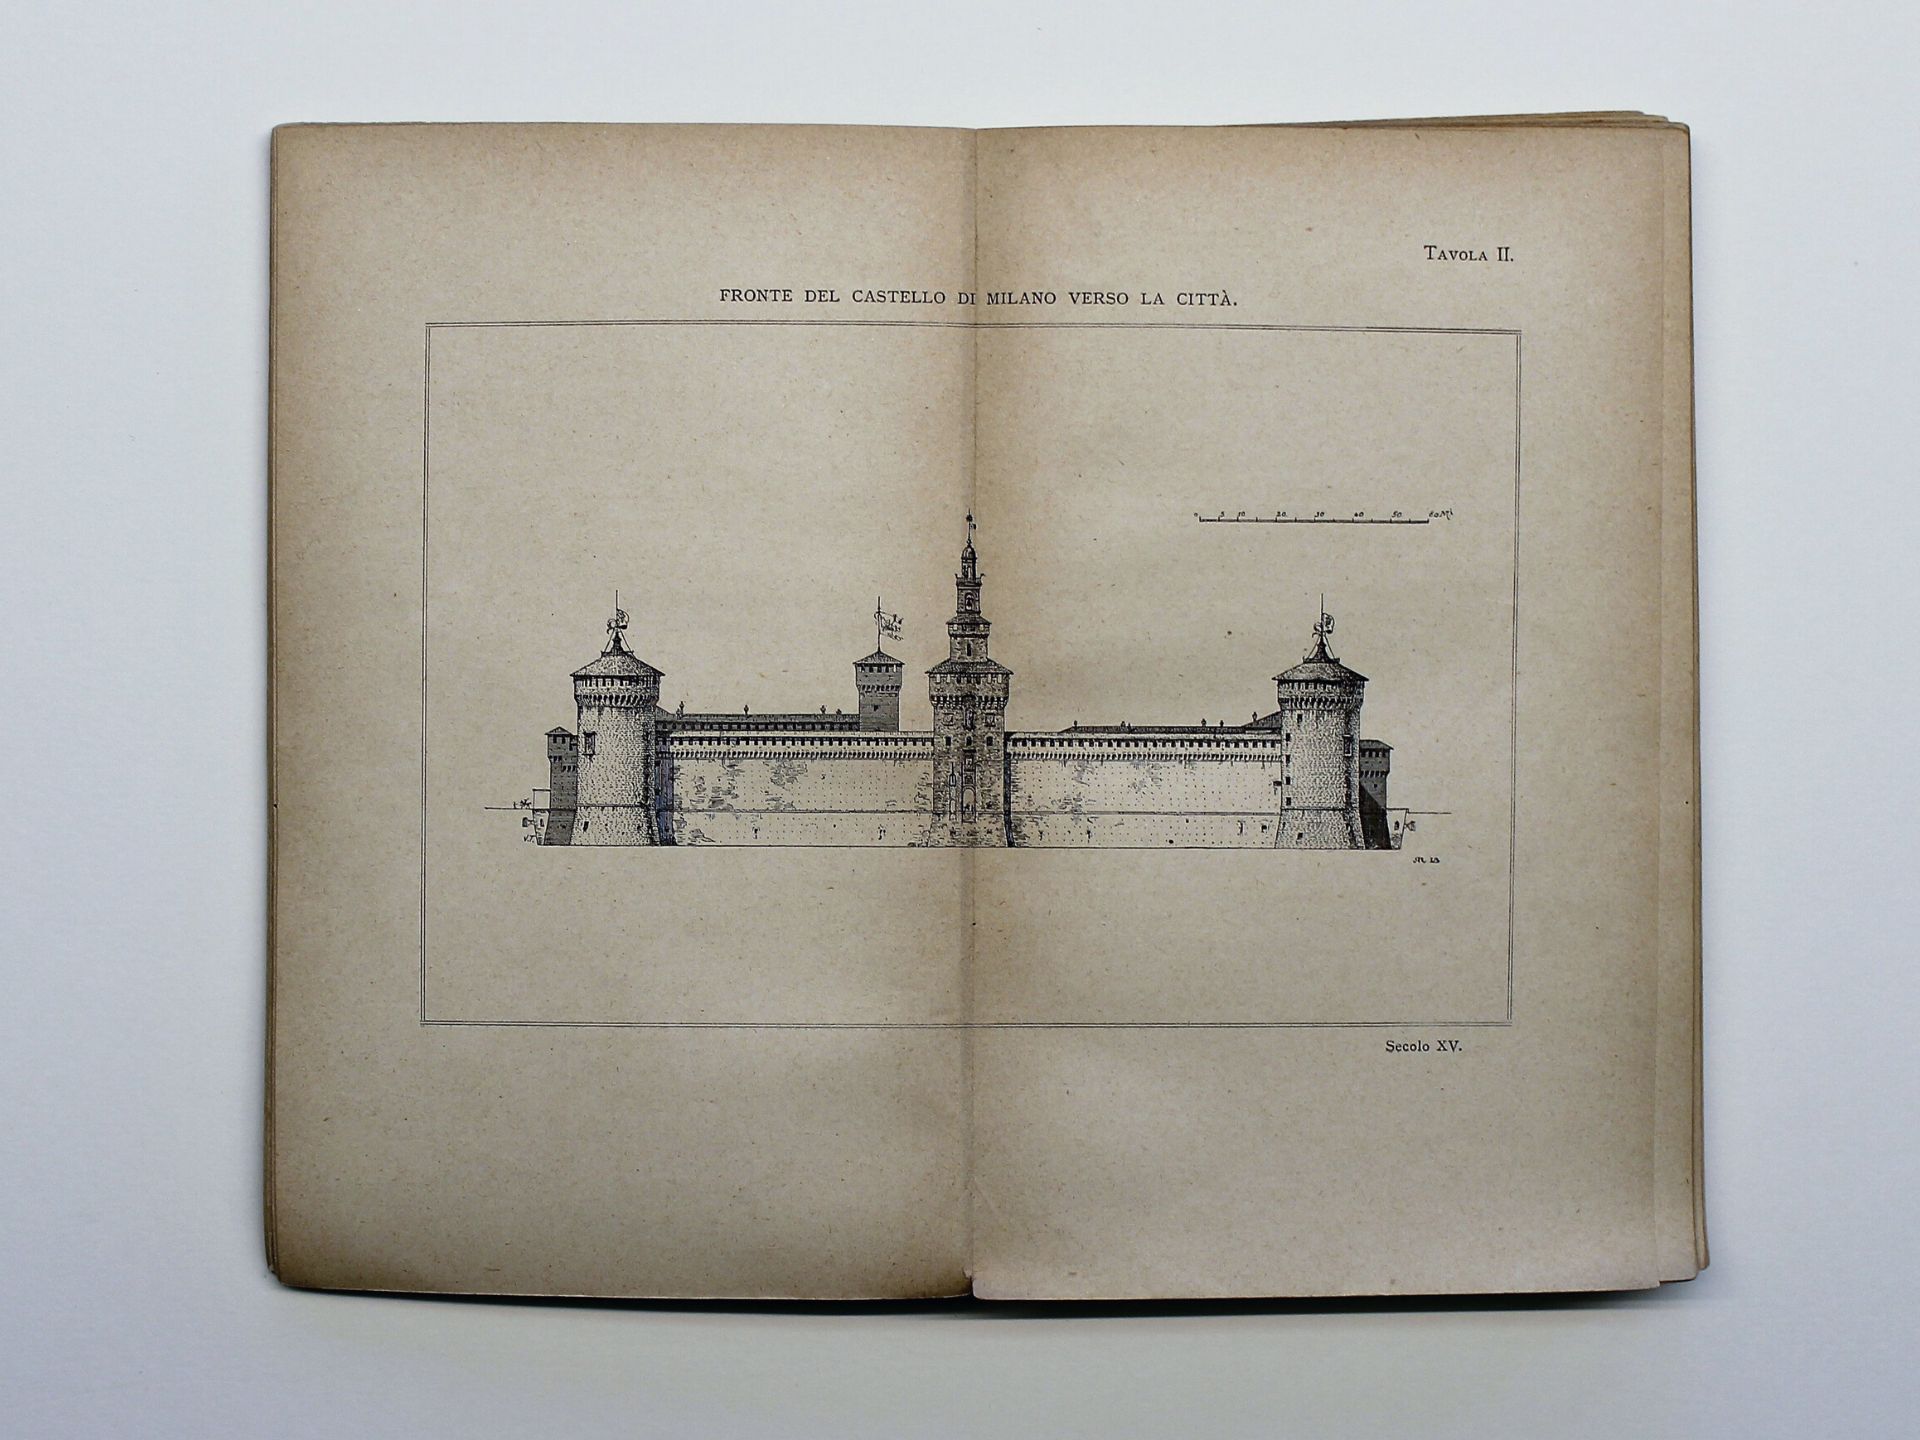 Historical guide of the Milan Castle